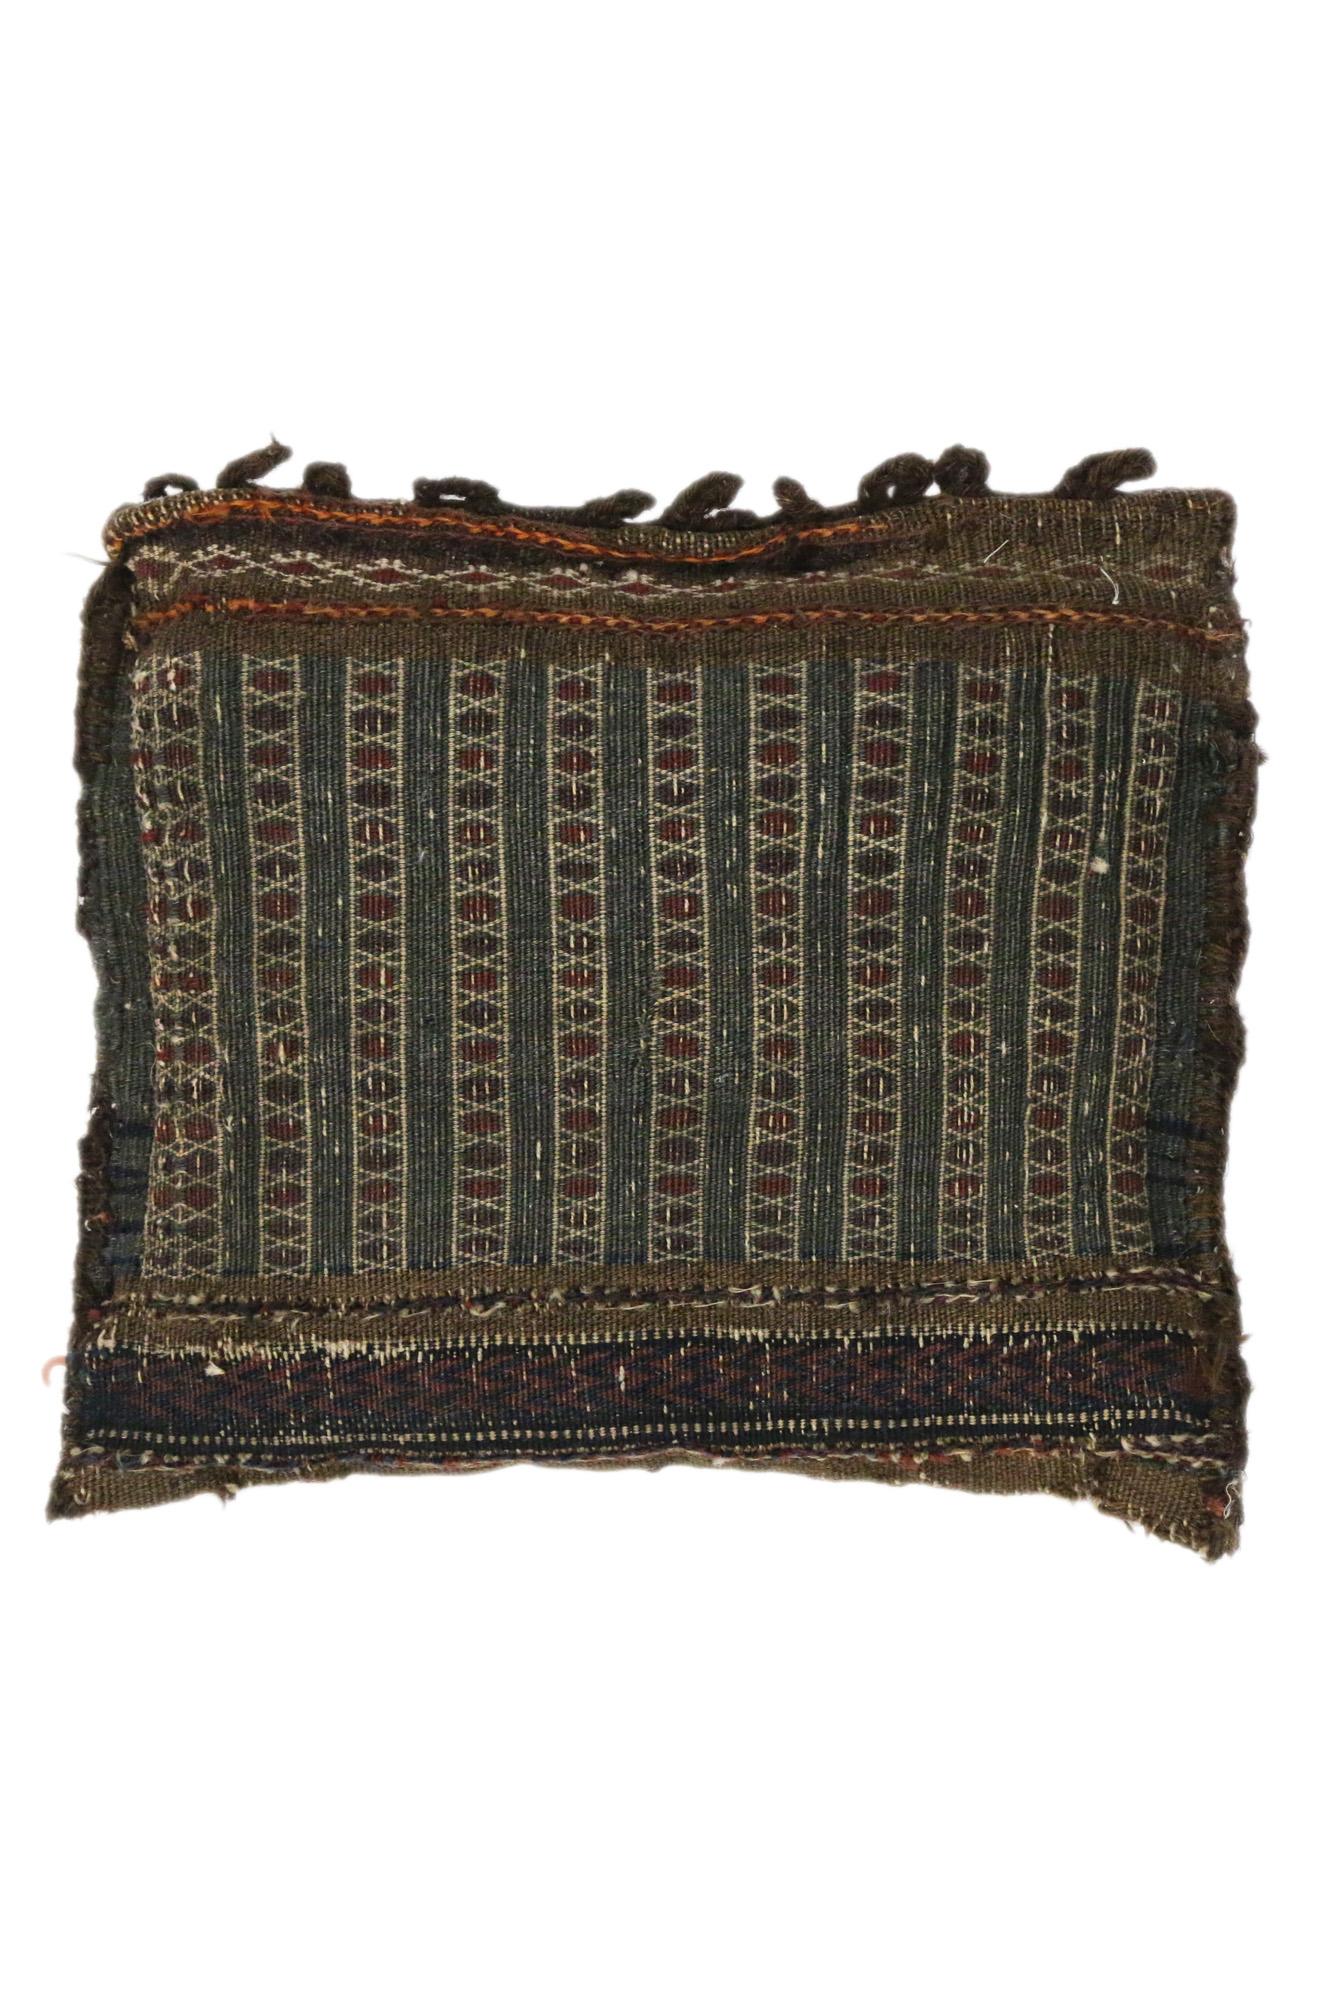 1880's Distressed Handwoven Antique Afghan Cushion For Sale